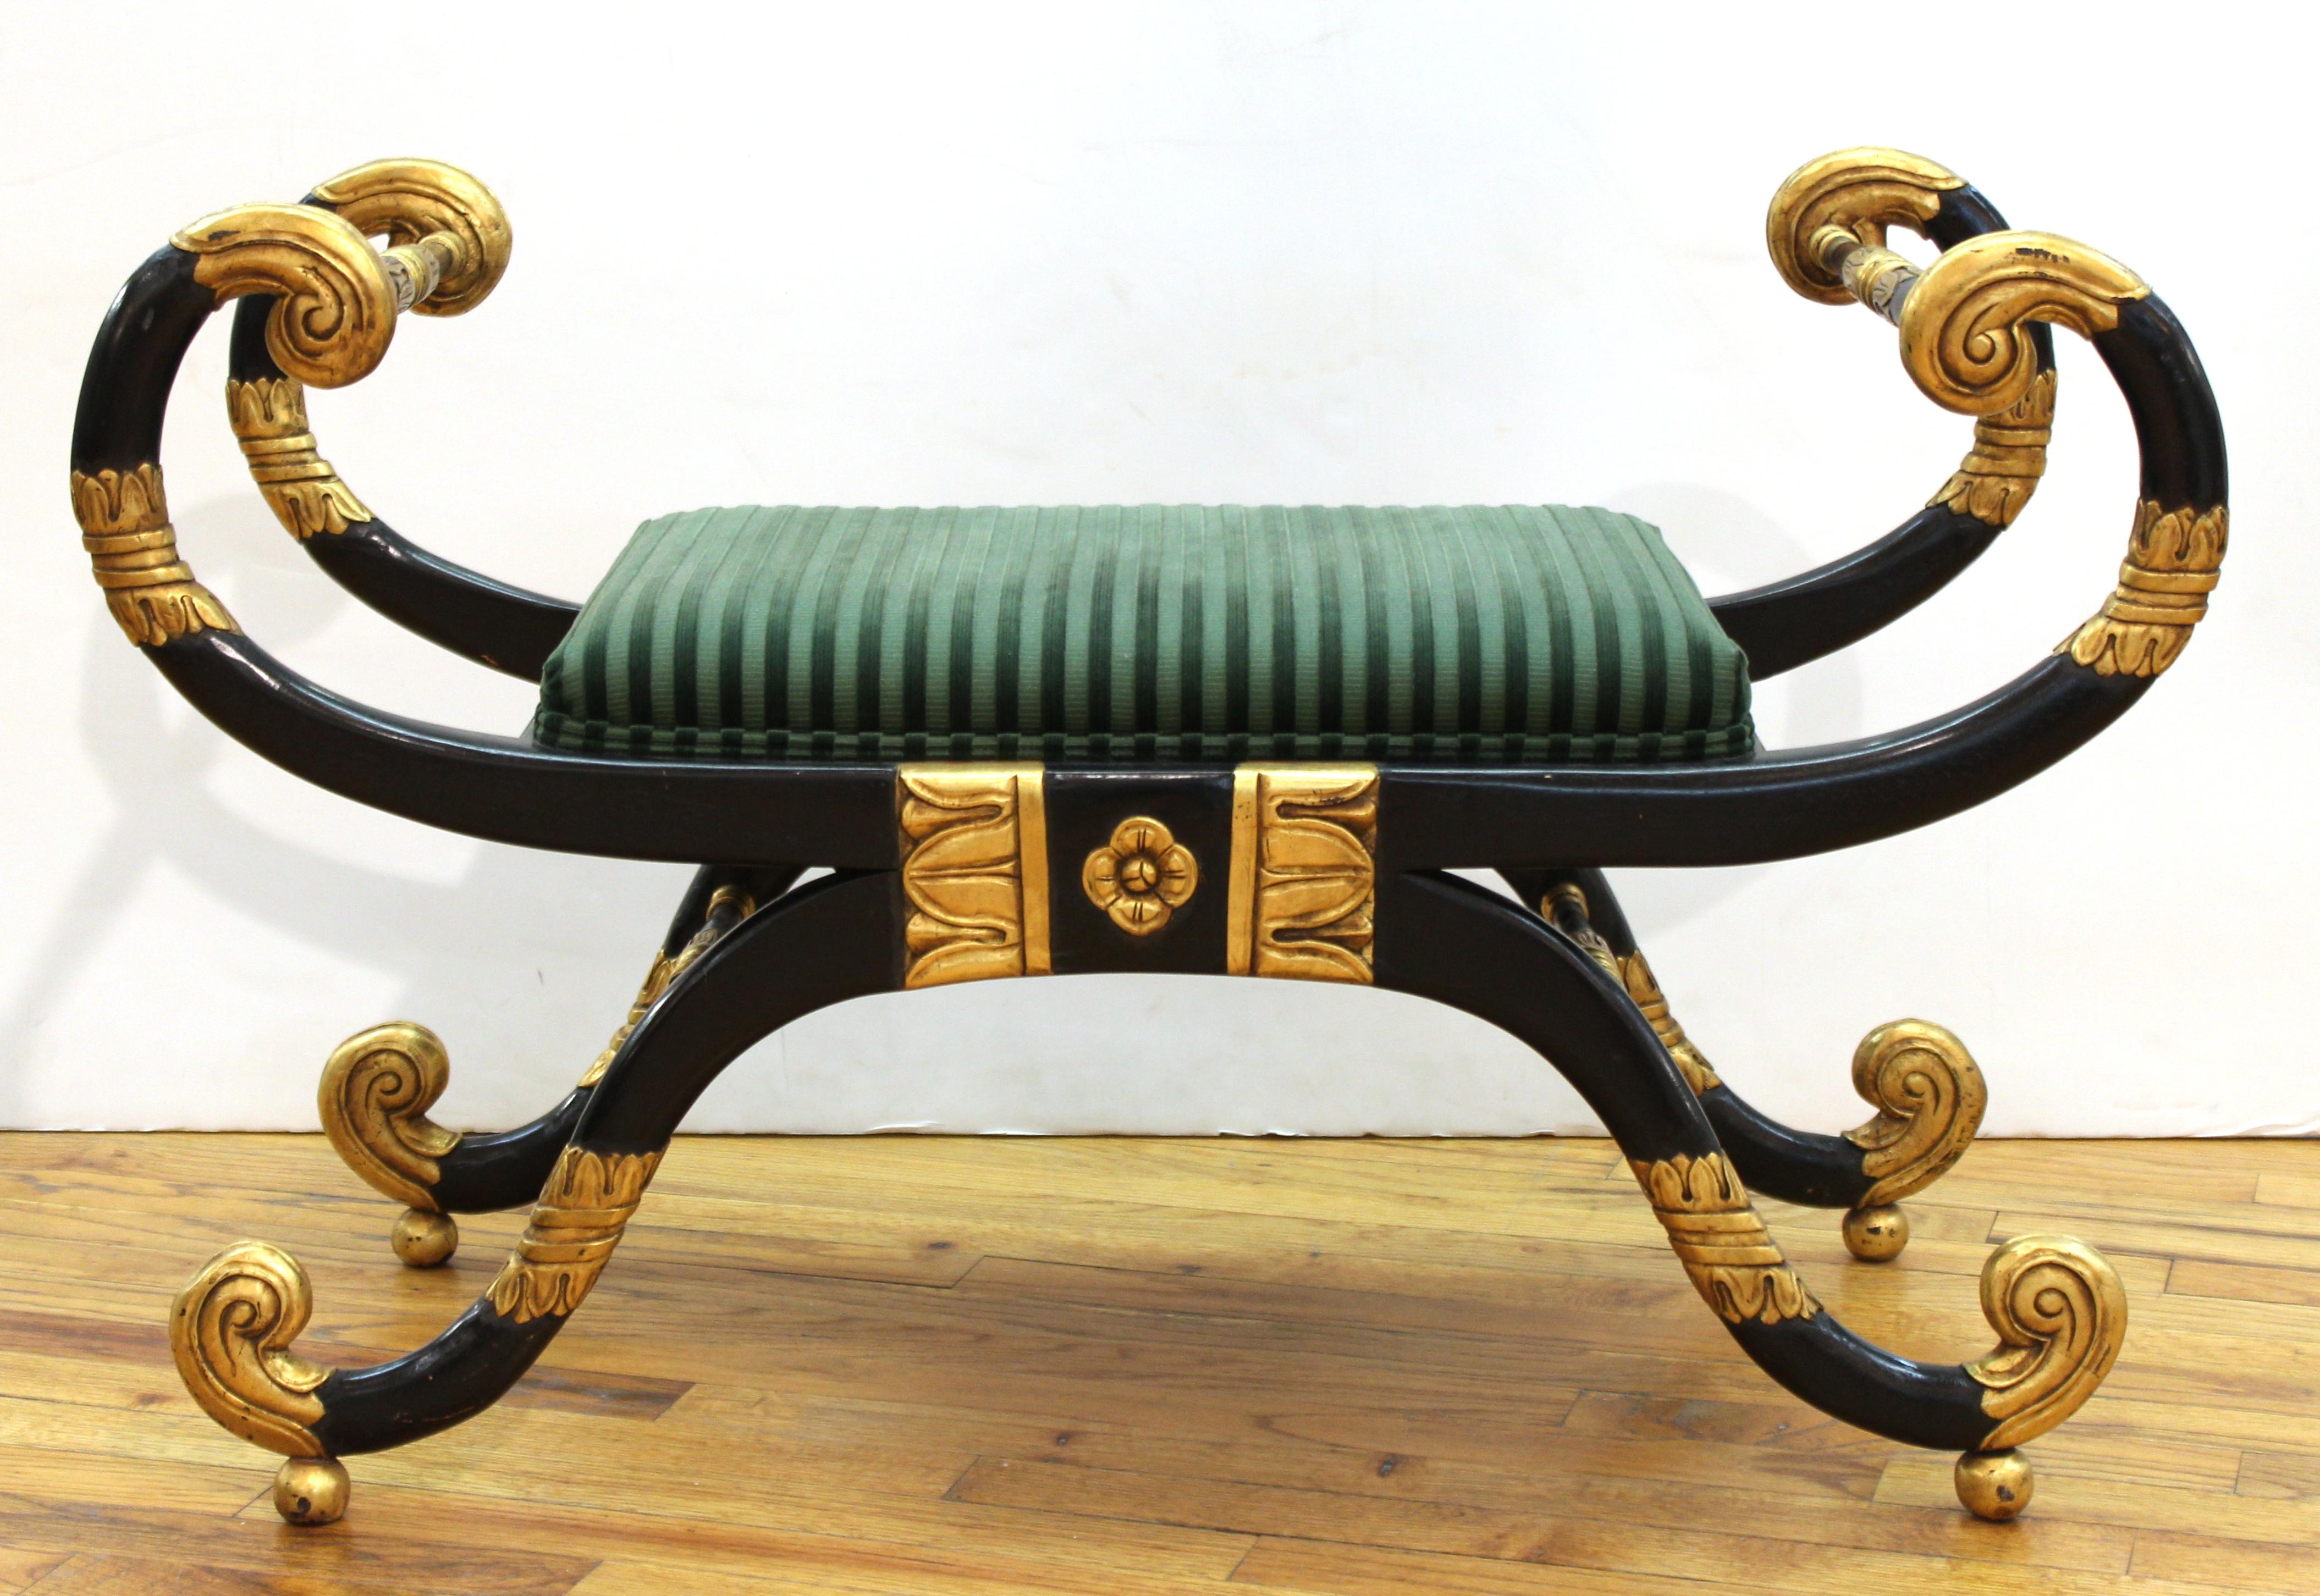 Neoclassical Revival style pair of Curule benches in ebonized and partially gilt carved wood. The pair has striped green upholstery. In great vintage condition with age-appropriate wear and use.